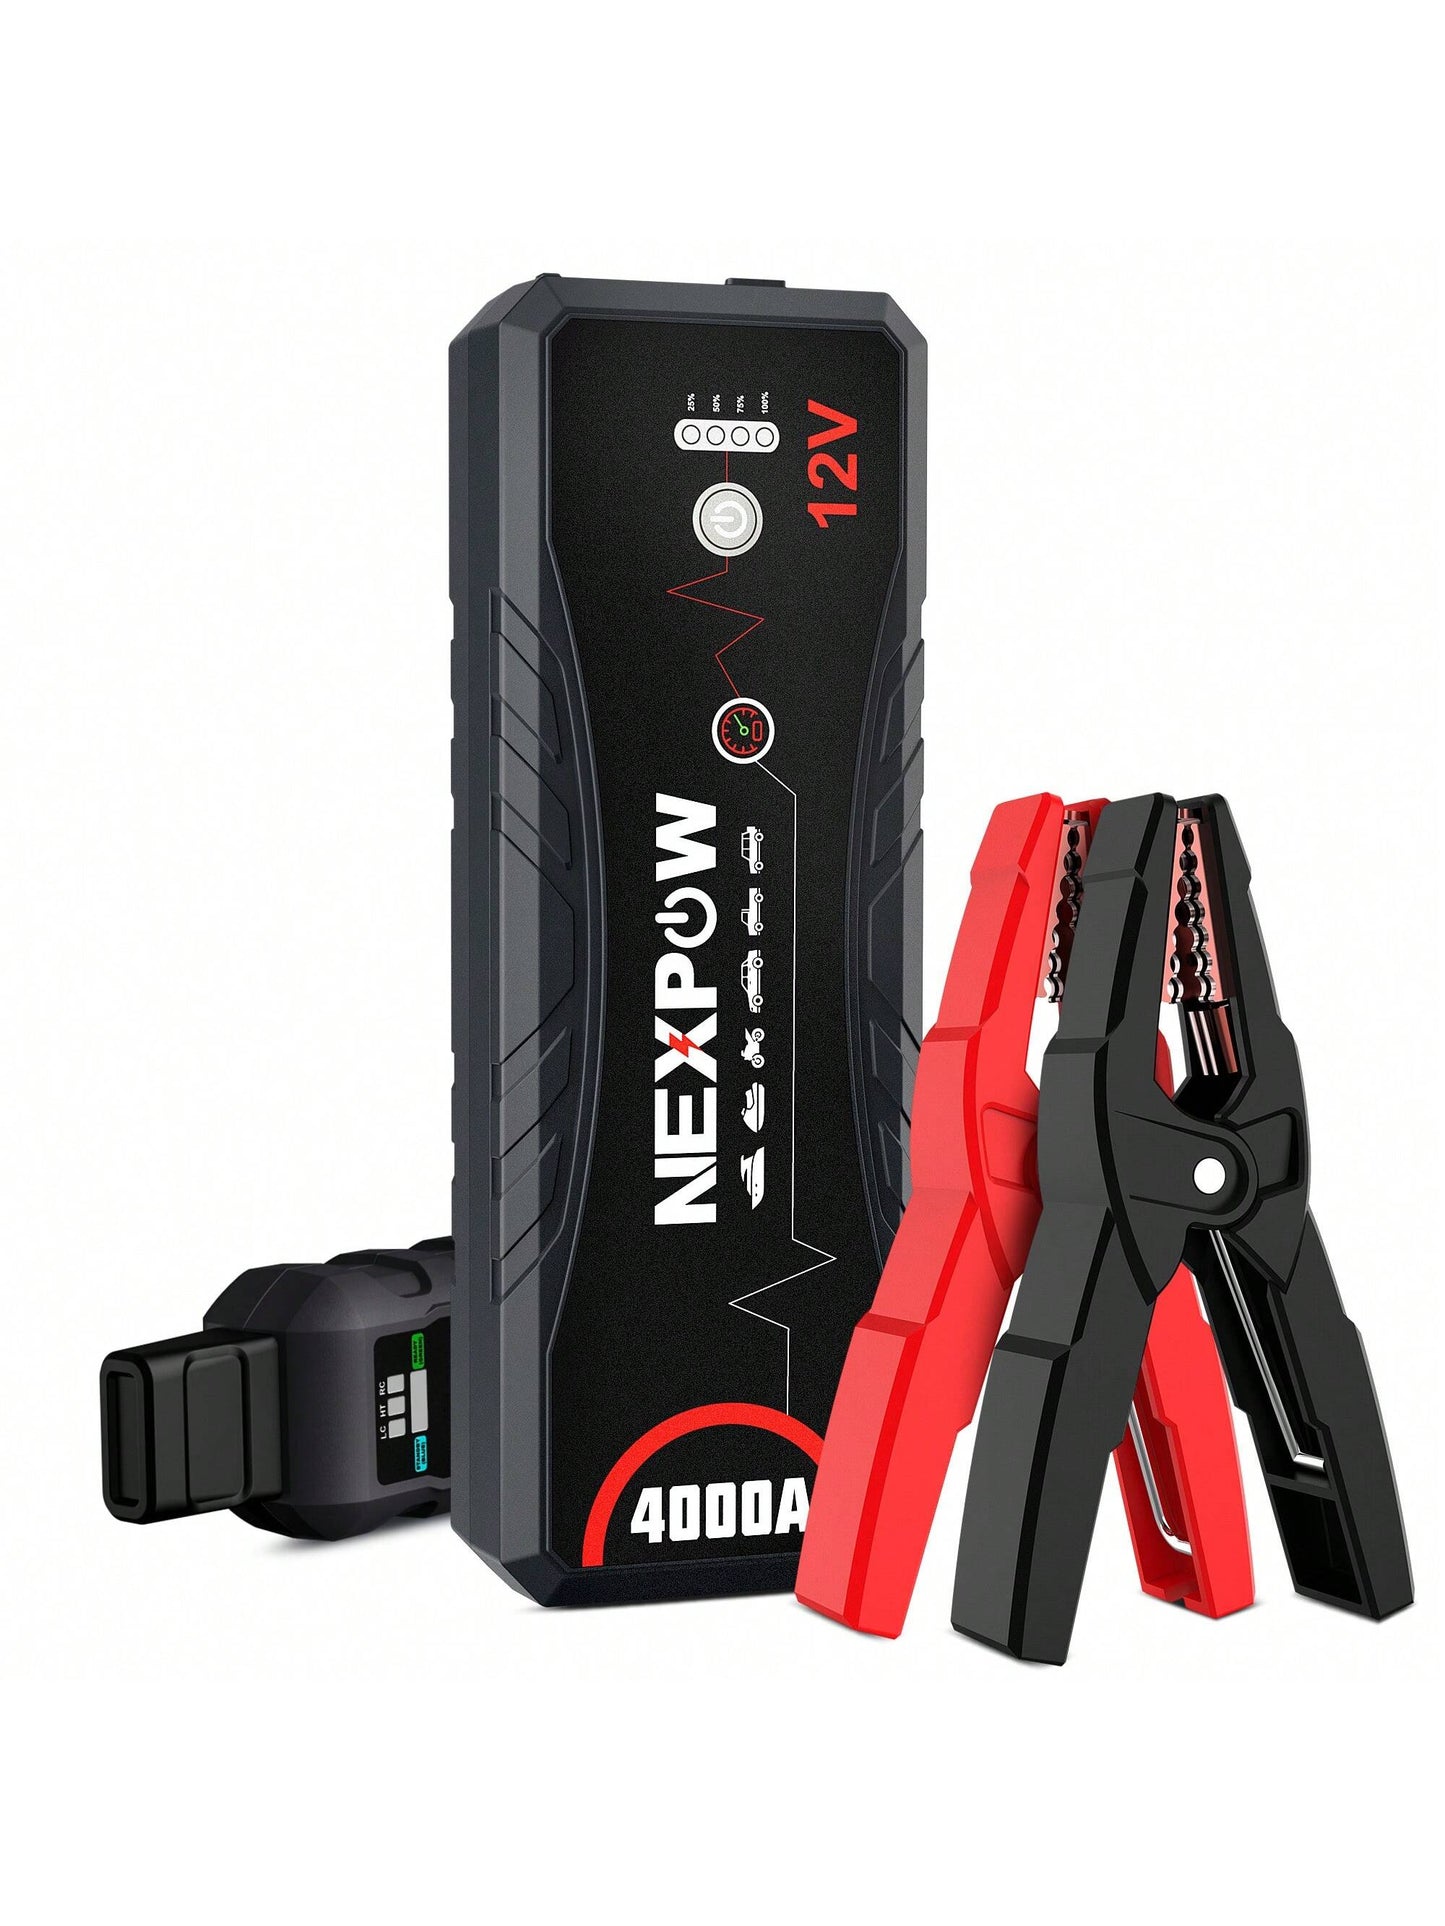 Portable Lithium Battery Jump Starter with Built-In LED Light